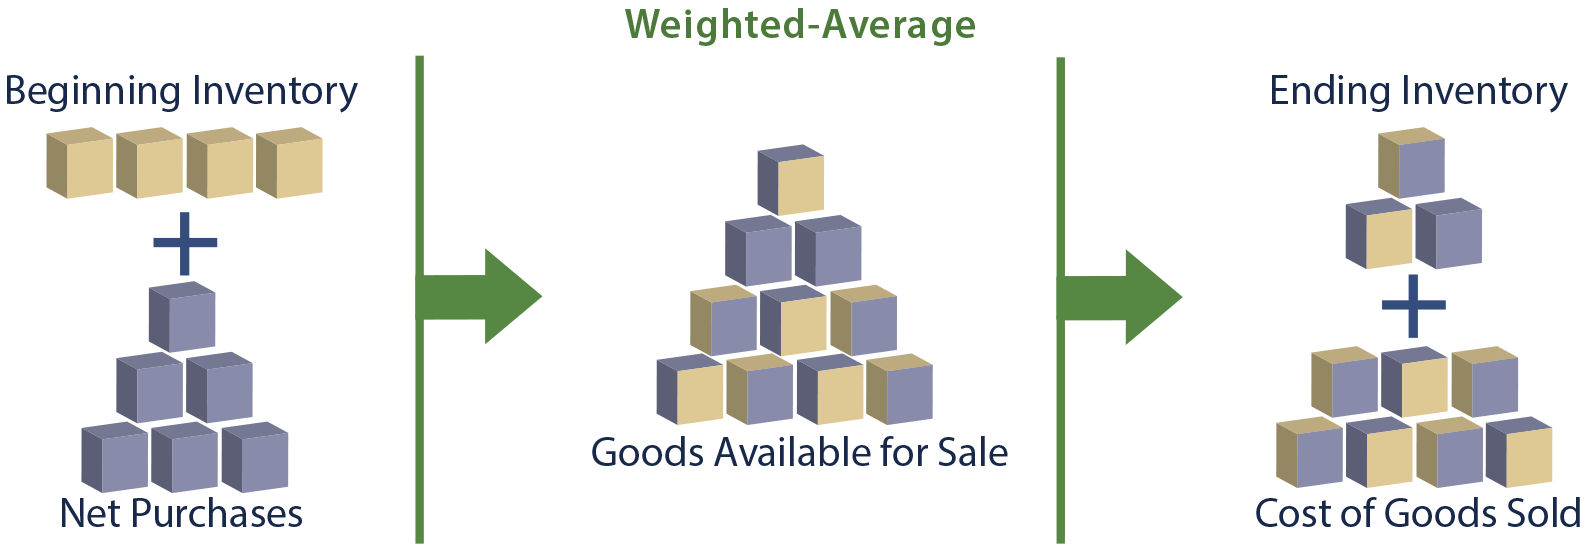 Weighted Average Cost - Accounting Inventory Valuation Method